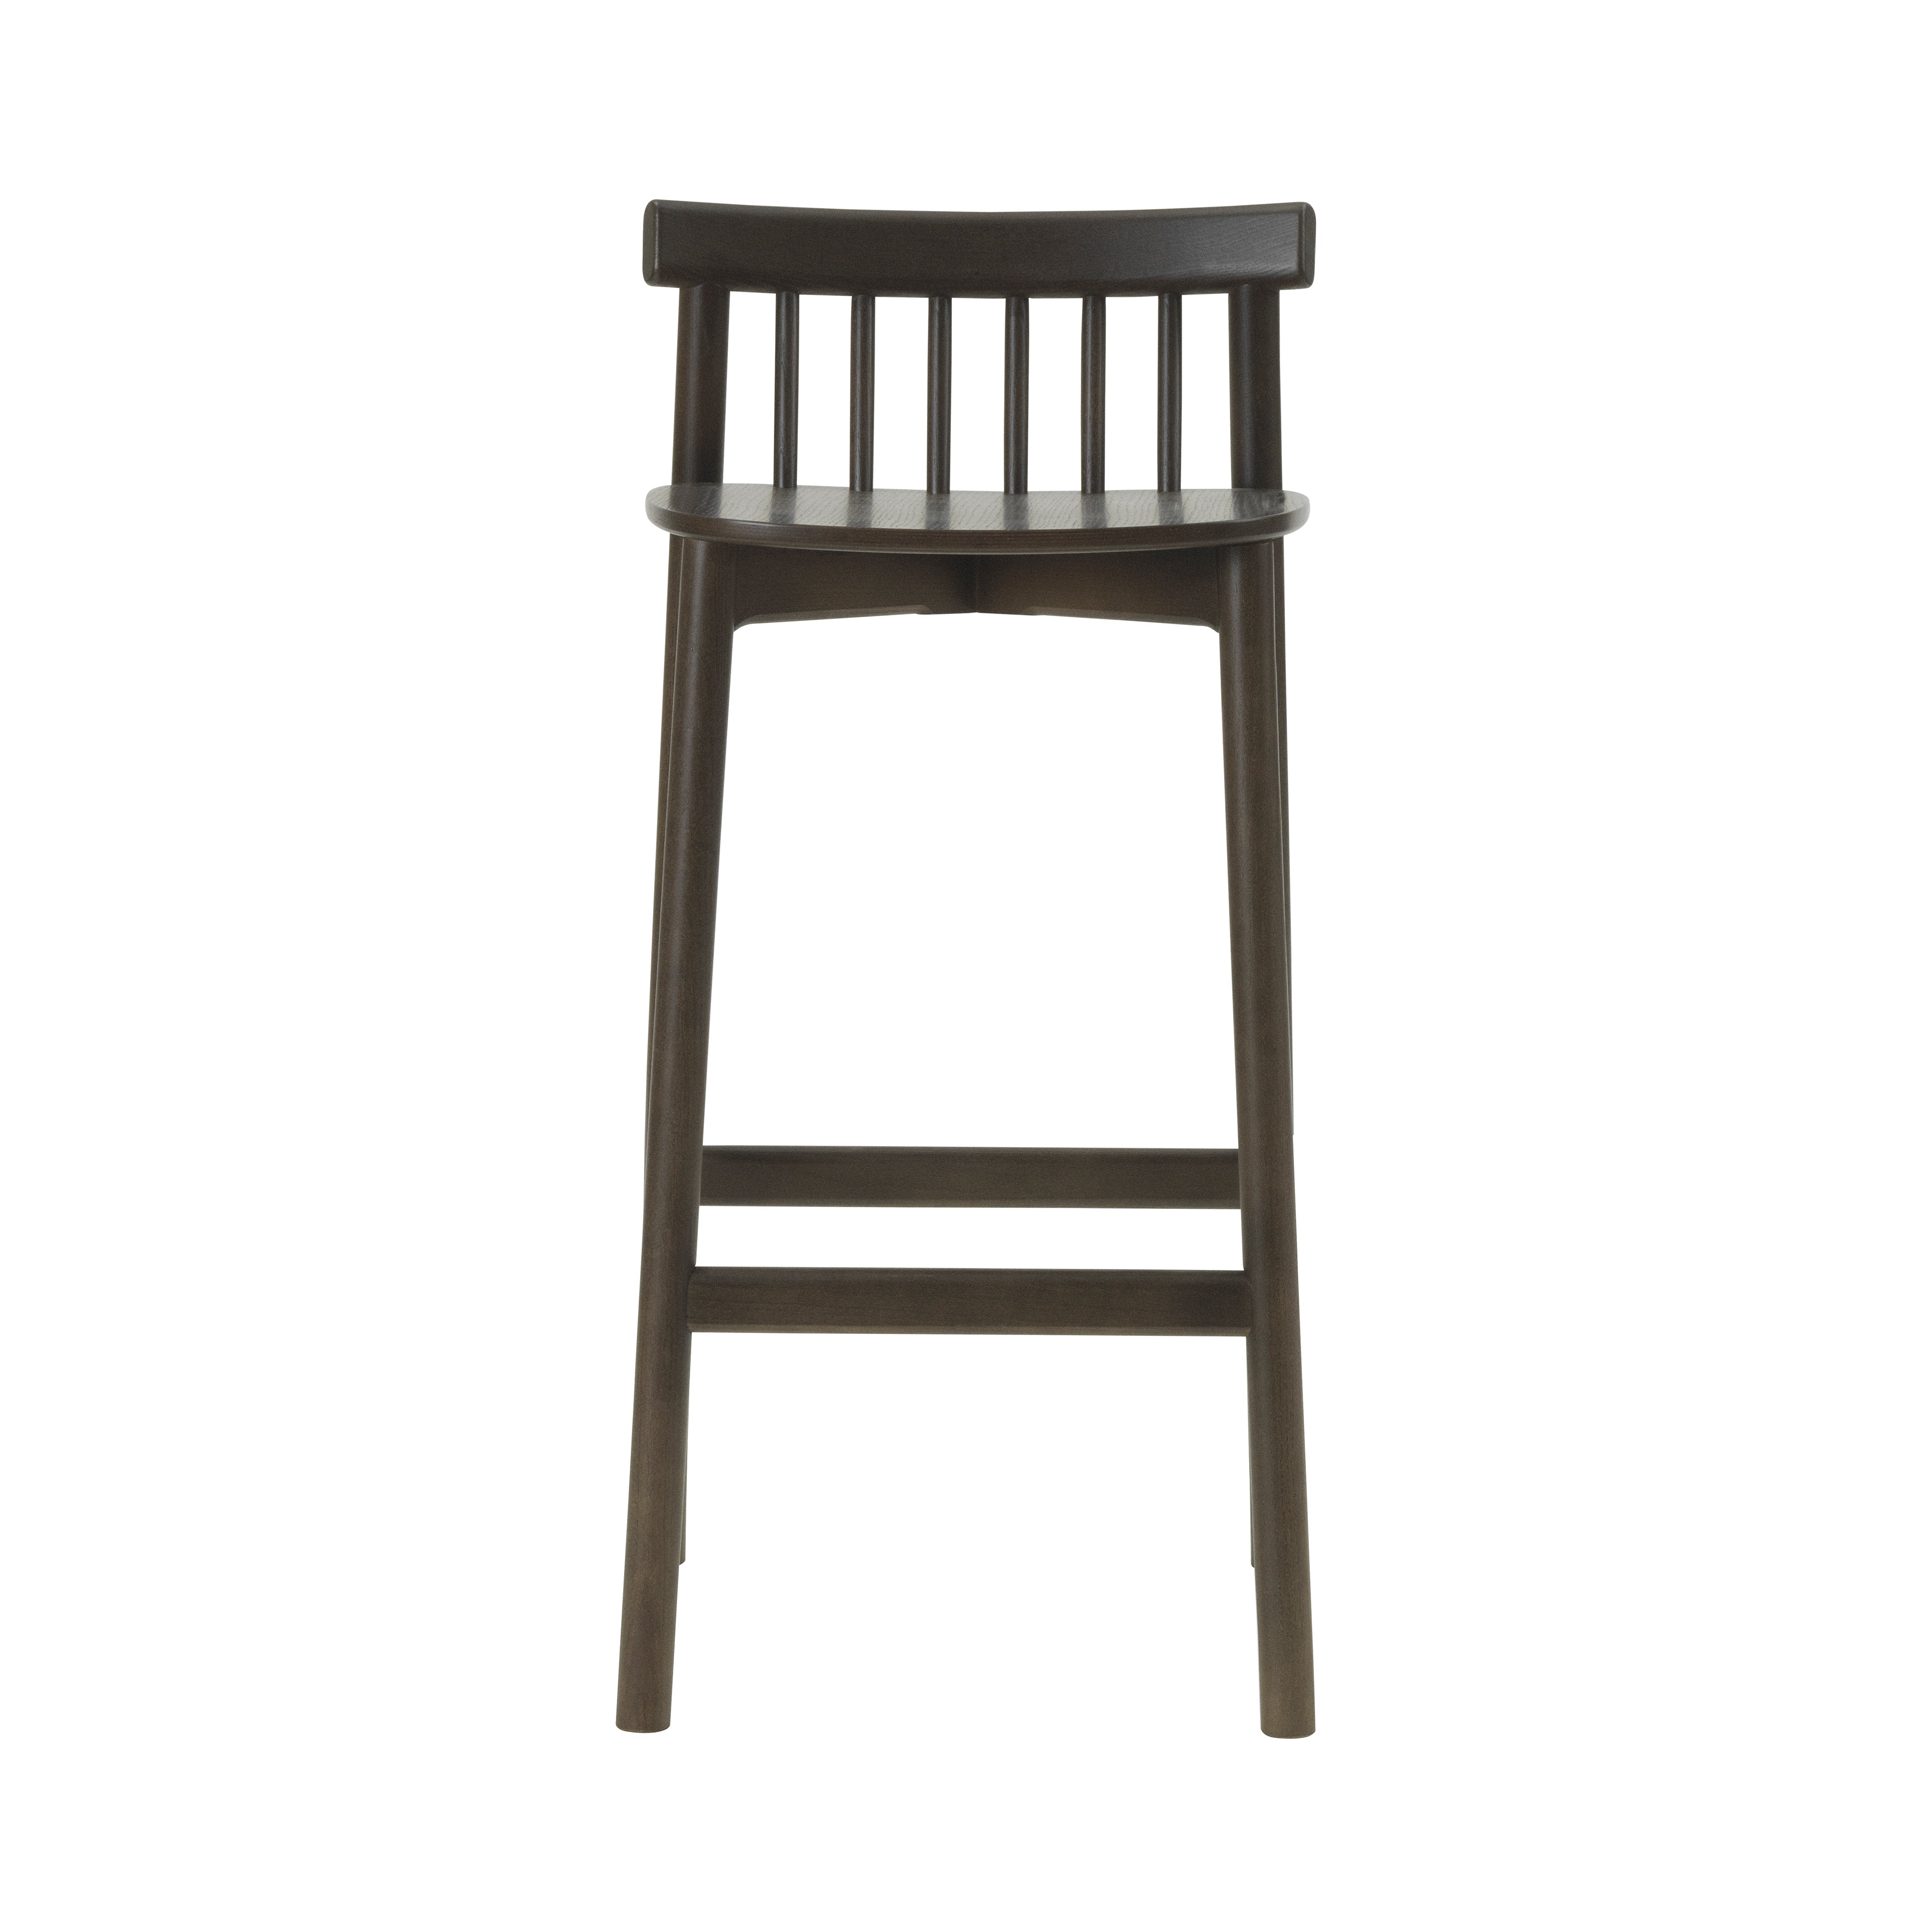 Pind Bar + Counter Stool: Bar + Brown Stained Ash